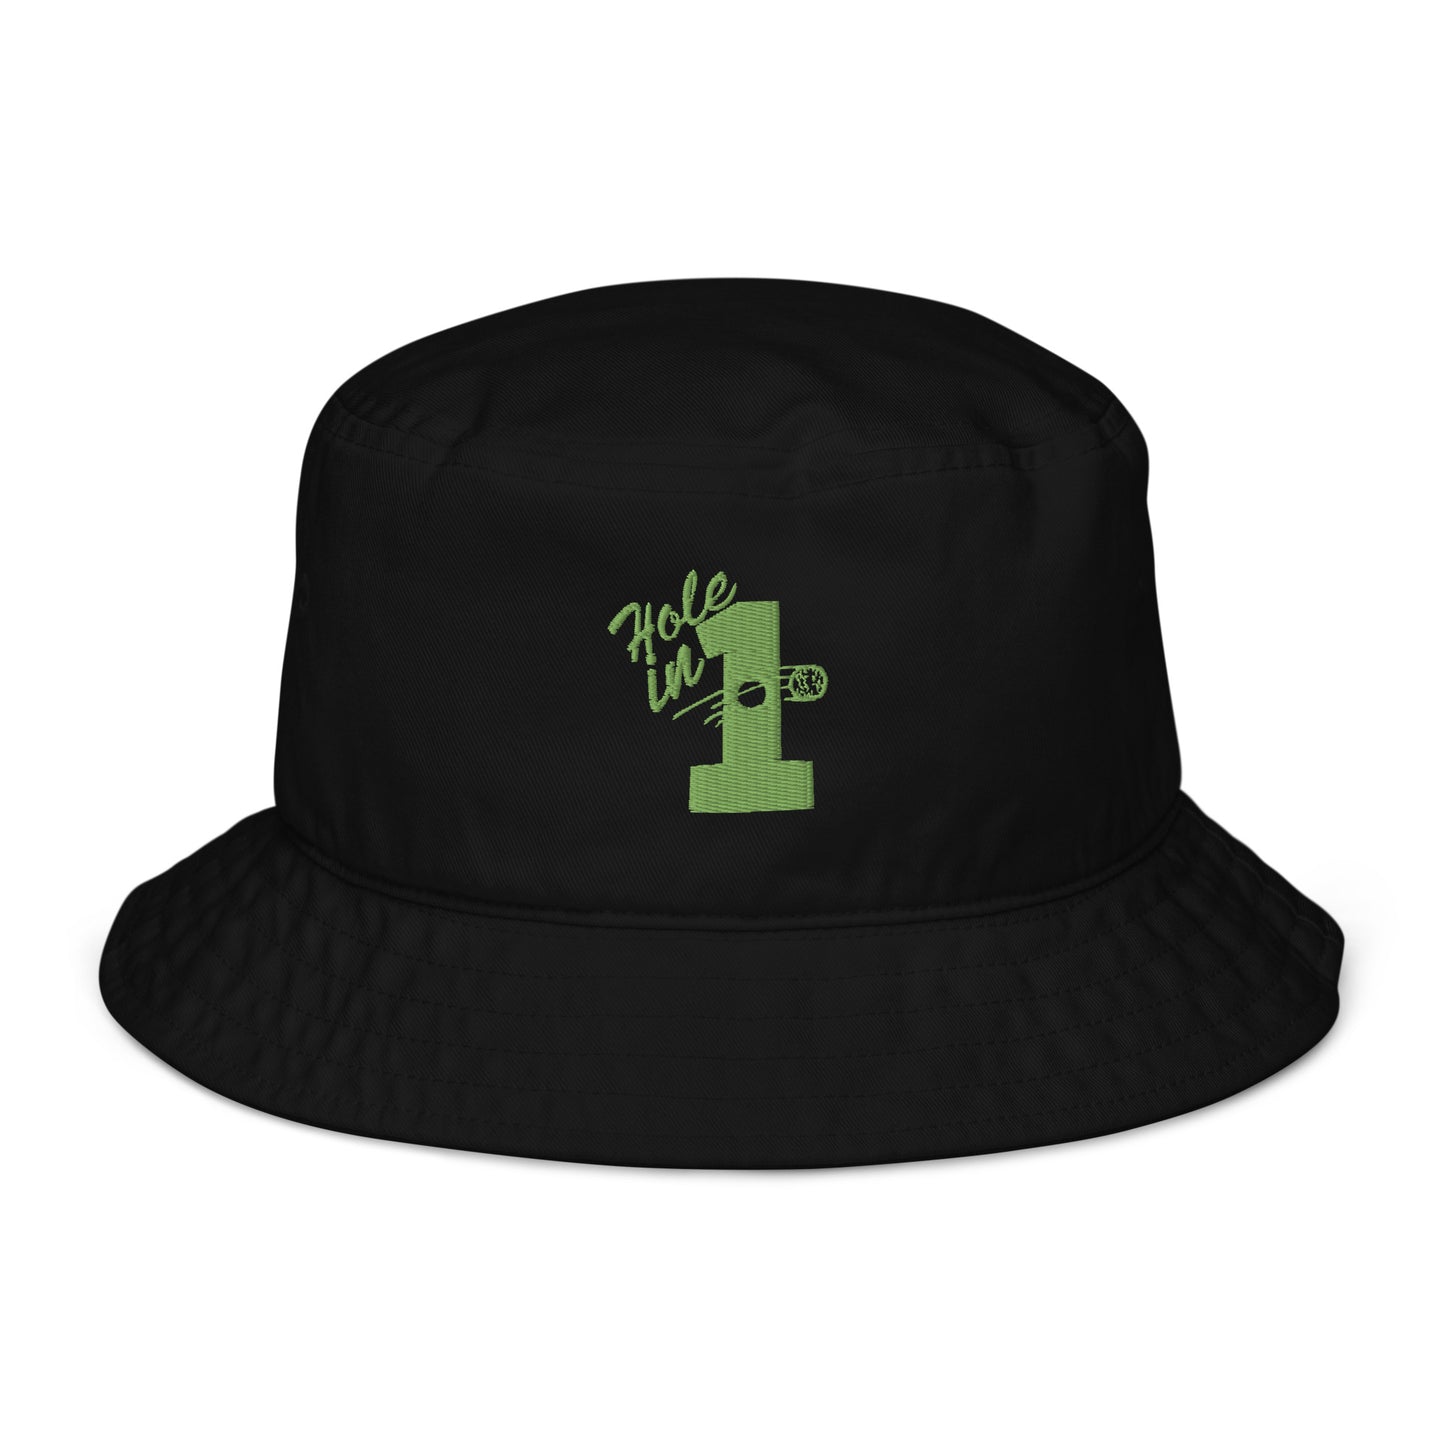 The "Hole in One" in Green Eco Bucket Hat